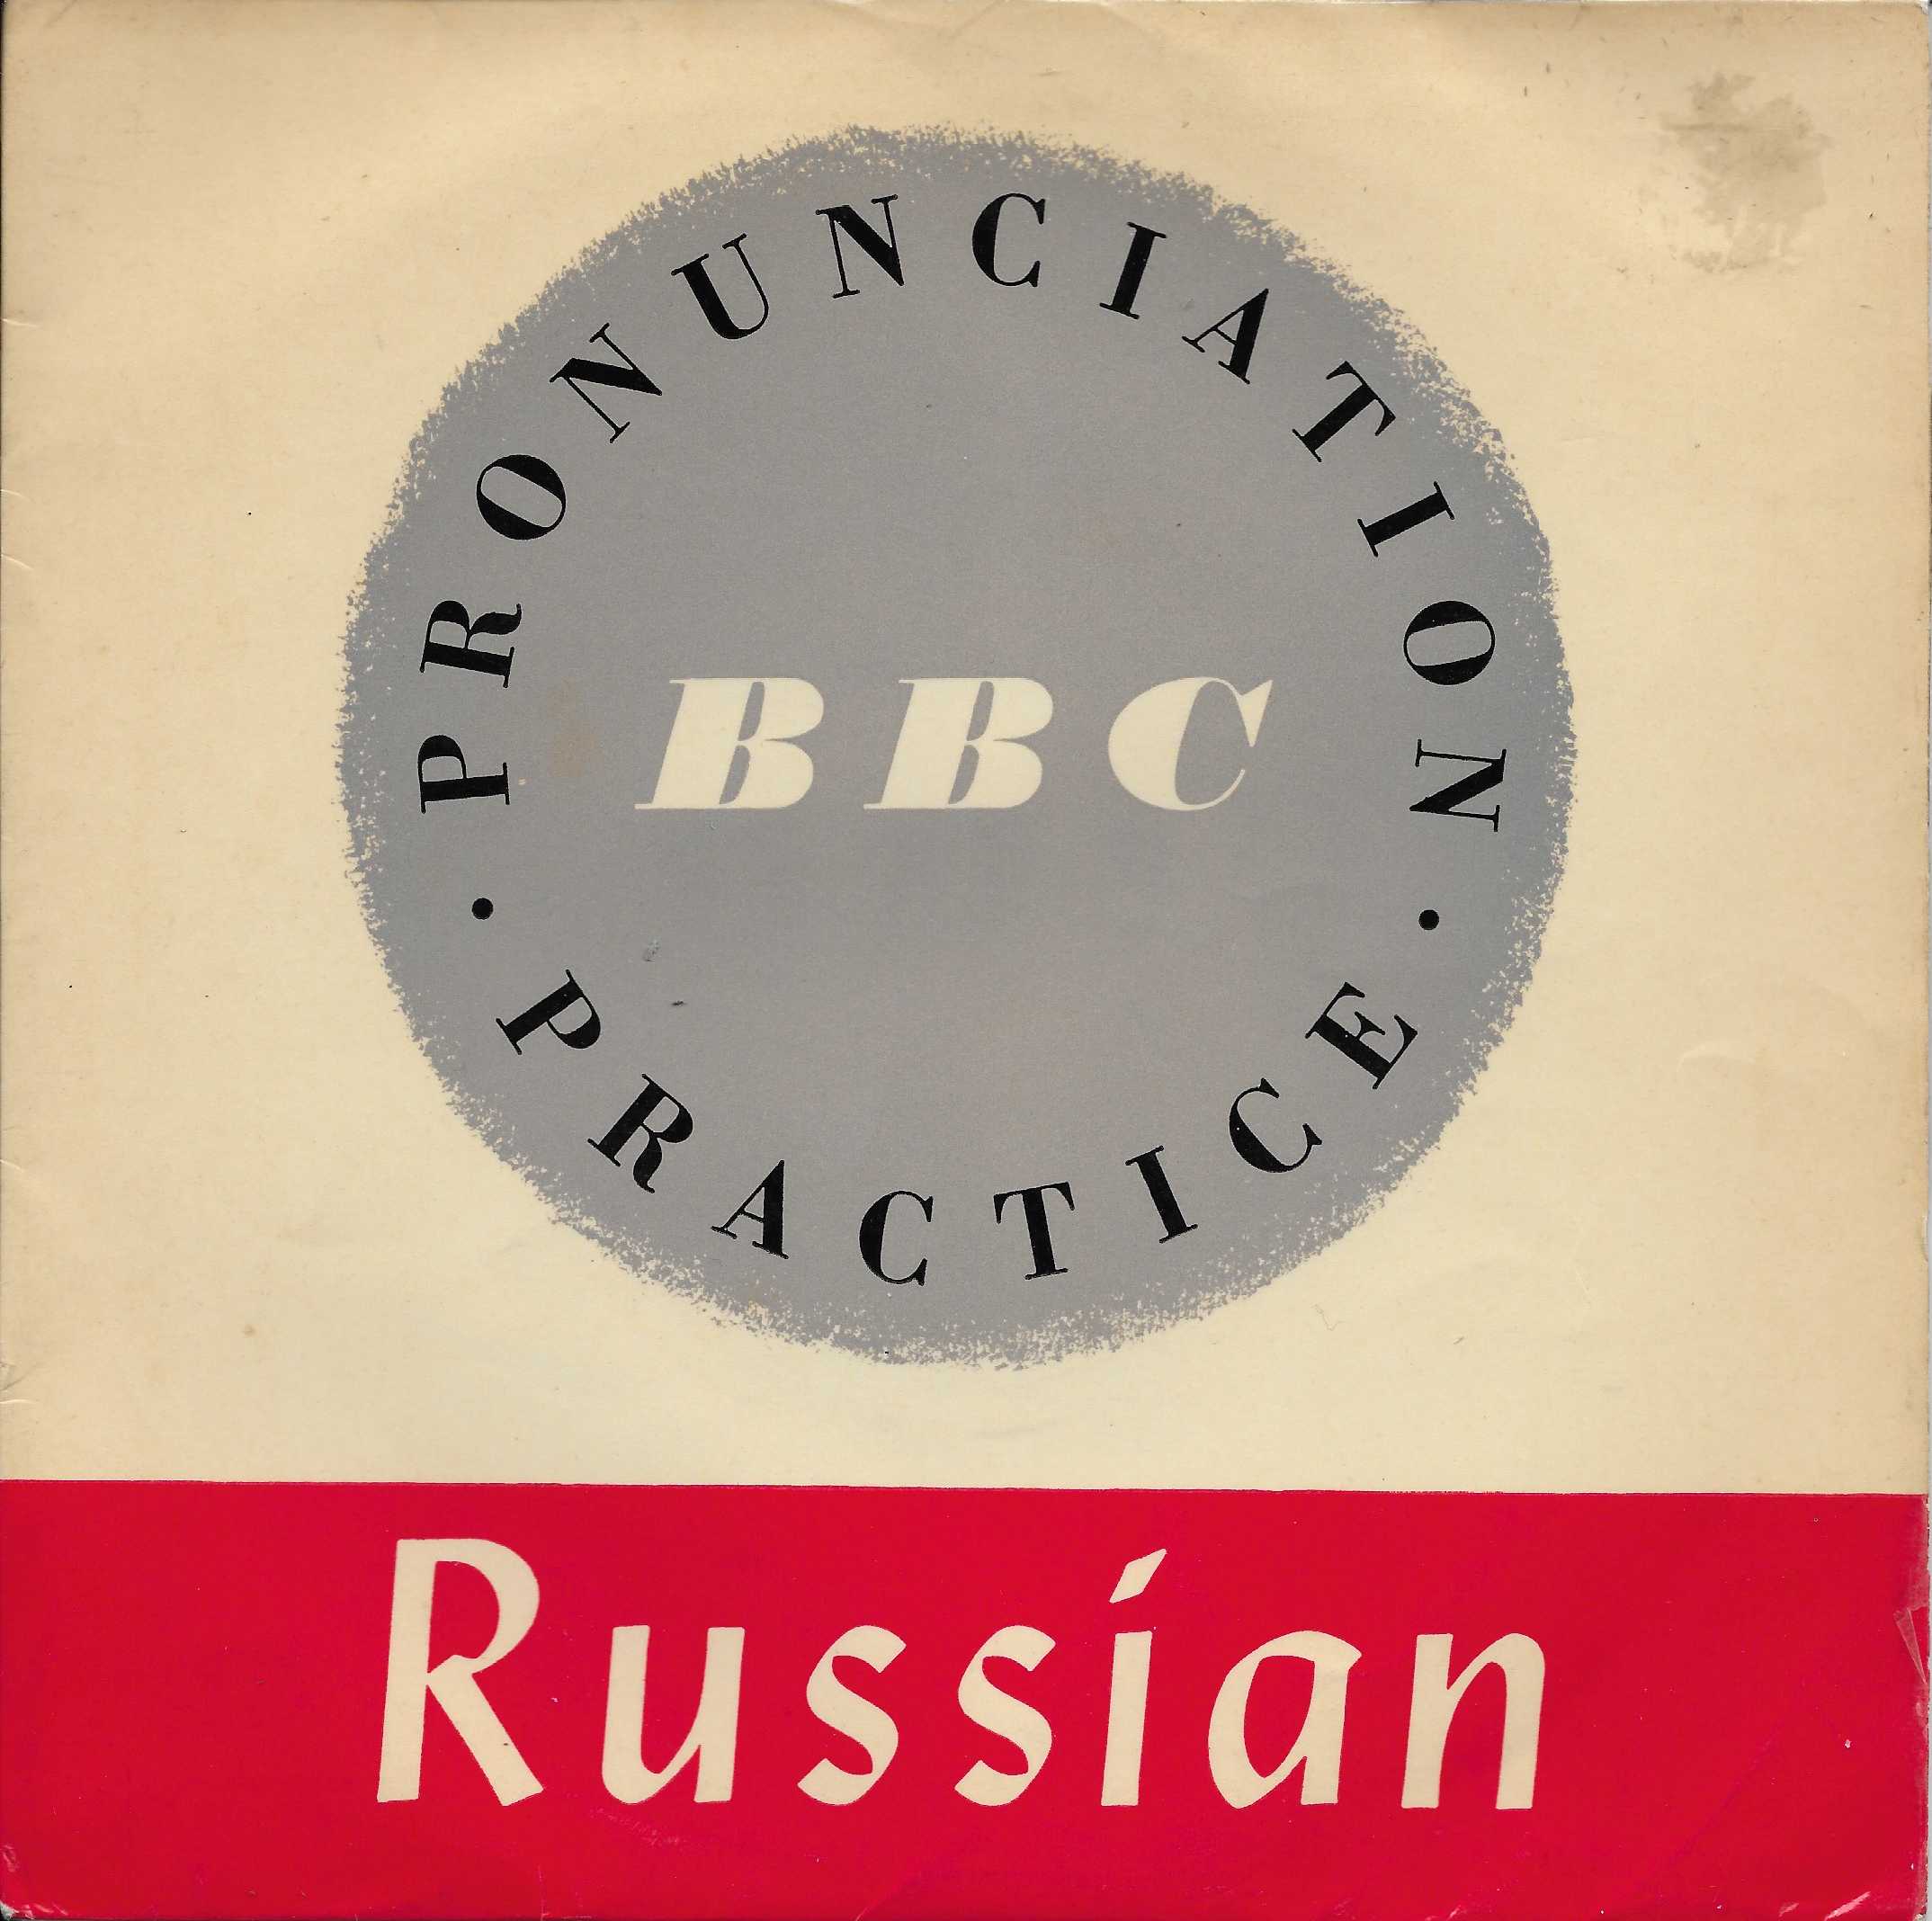 Picture of Russian by artist Dennis Ward from the BBC singles - Records and Tapes library